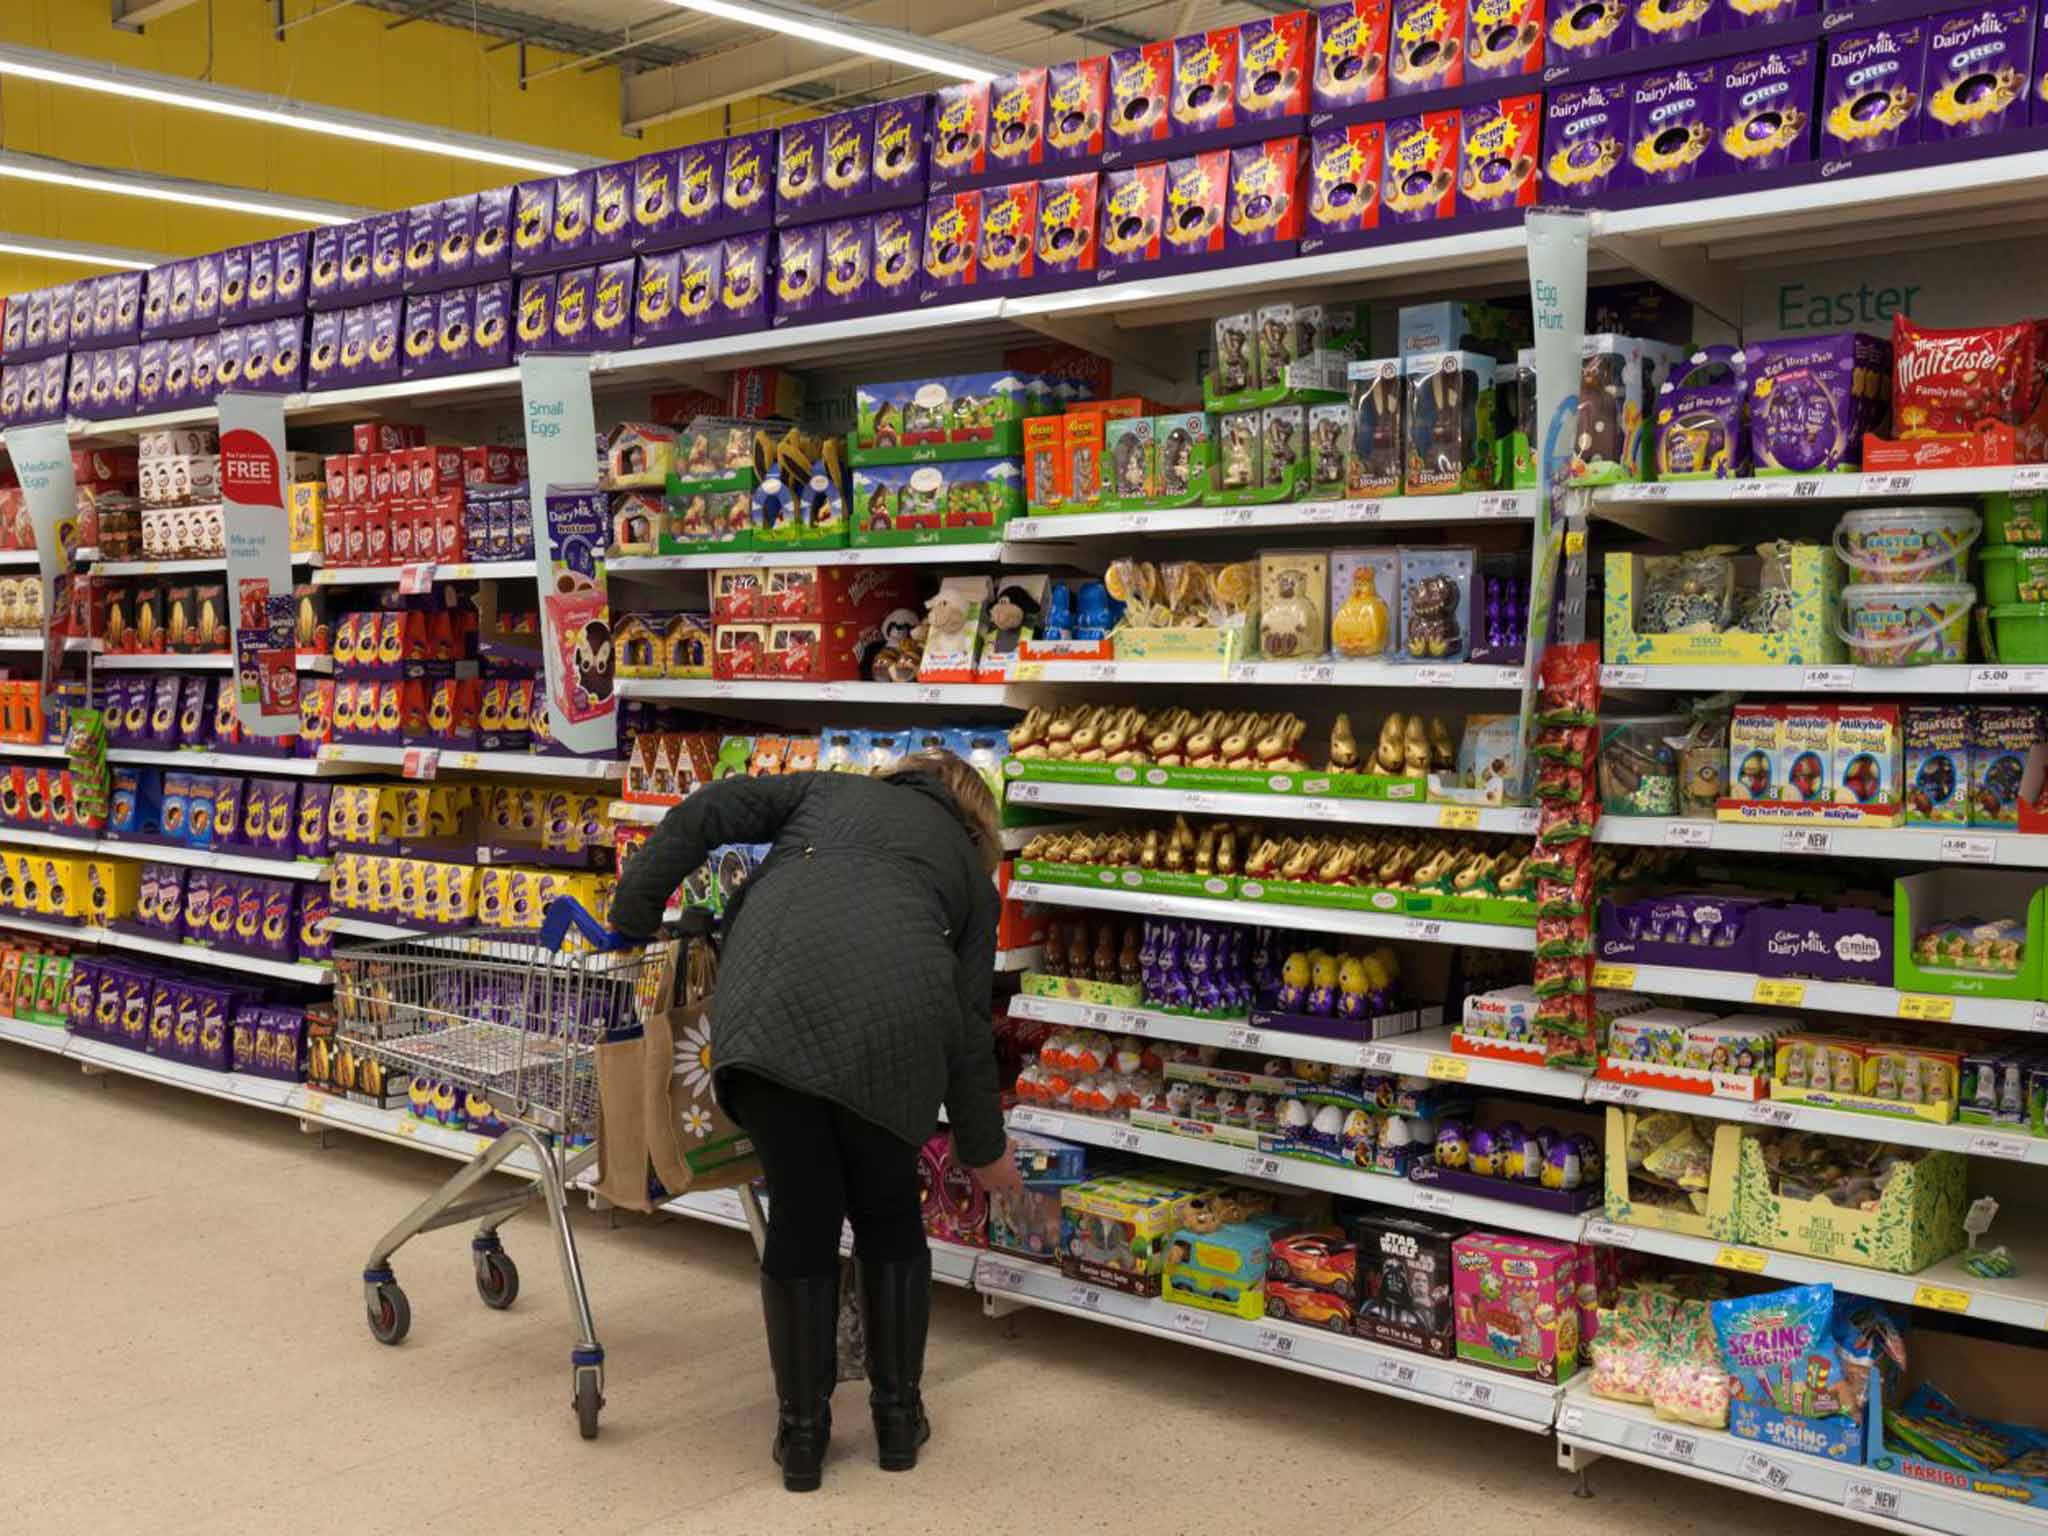 Over-egged: at the centre of elaborate wrappings are hard economics – and not enough chocolate